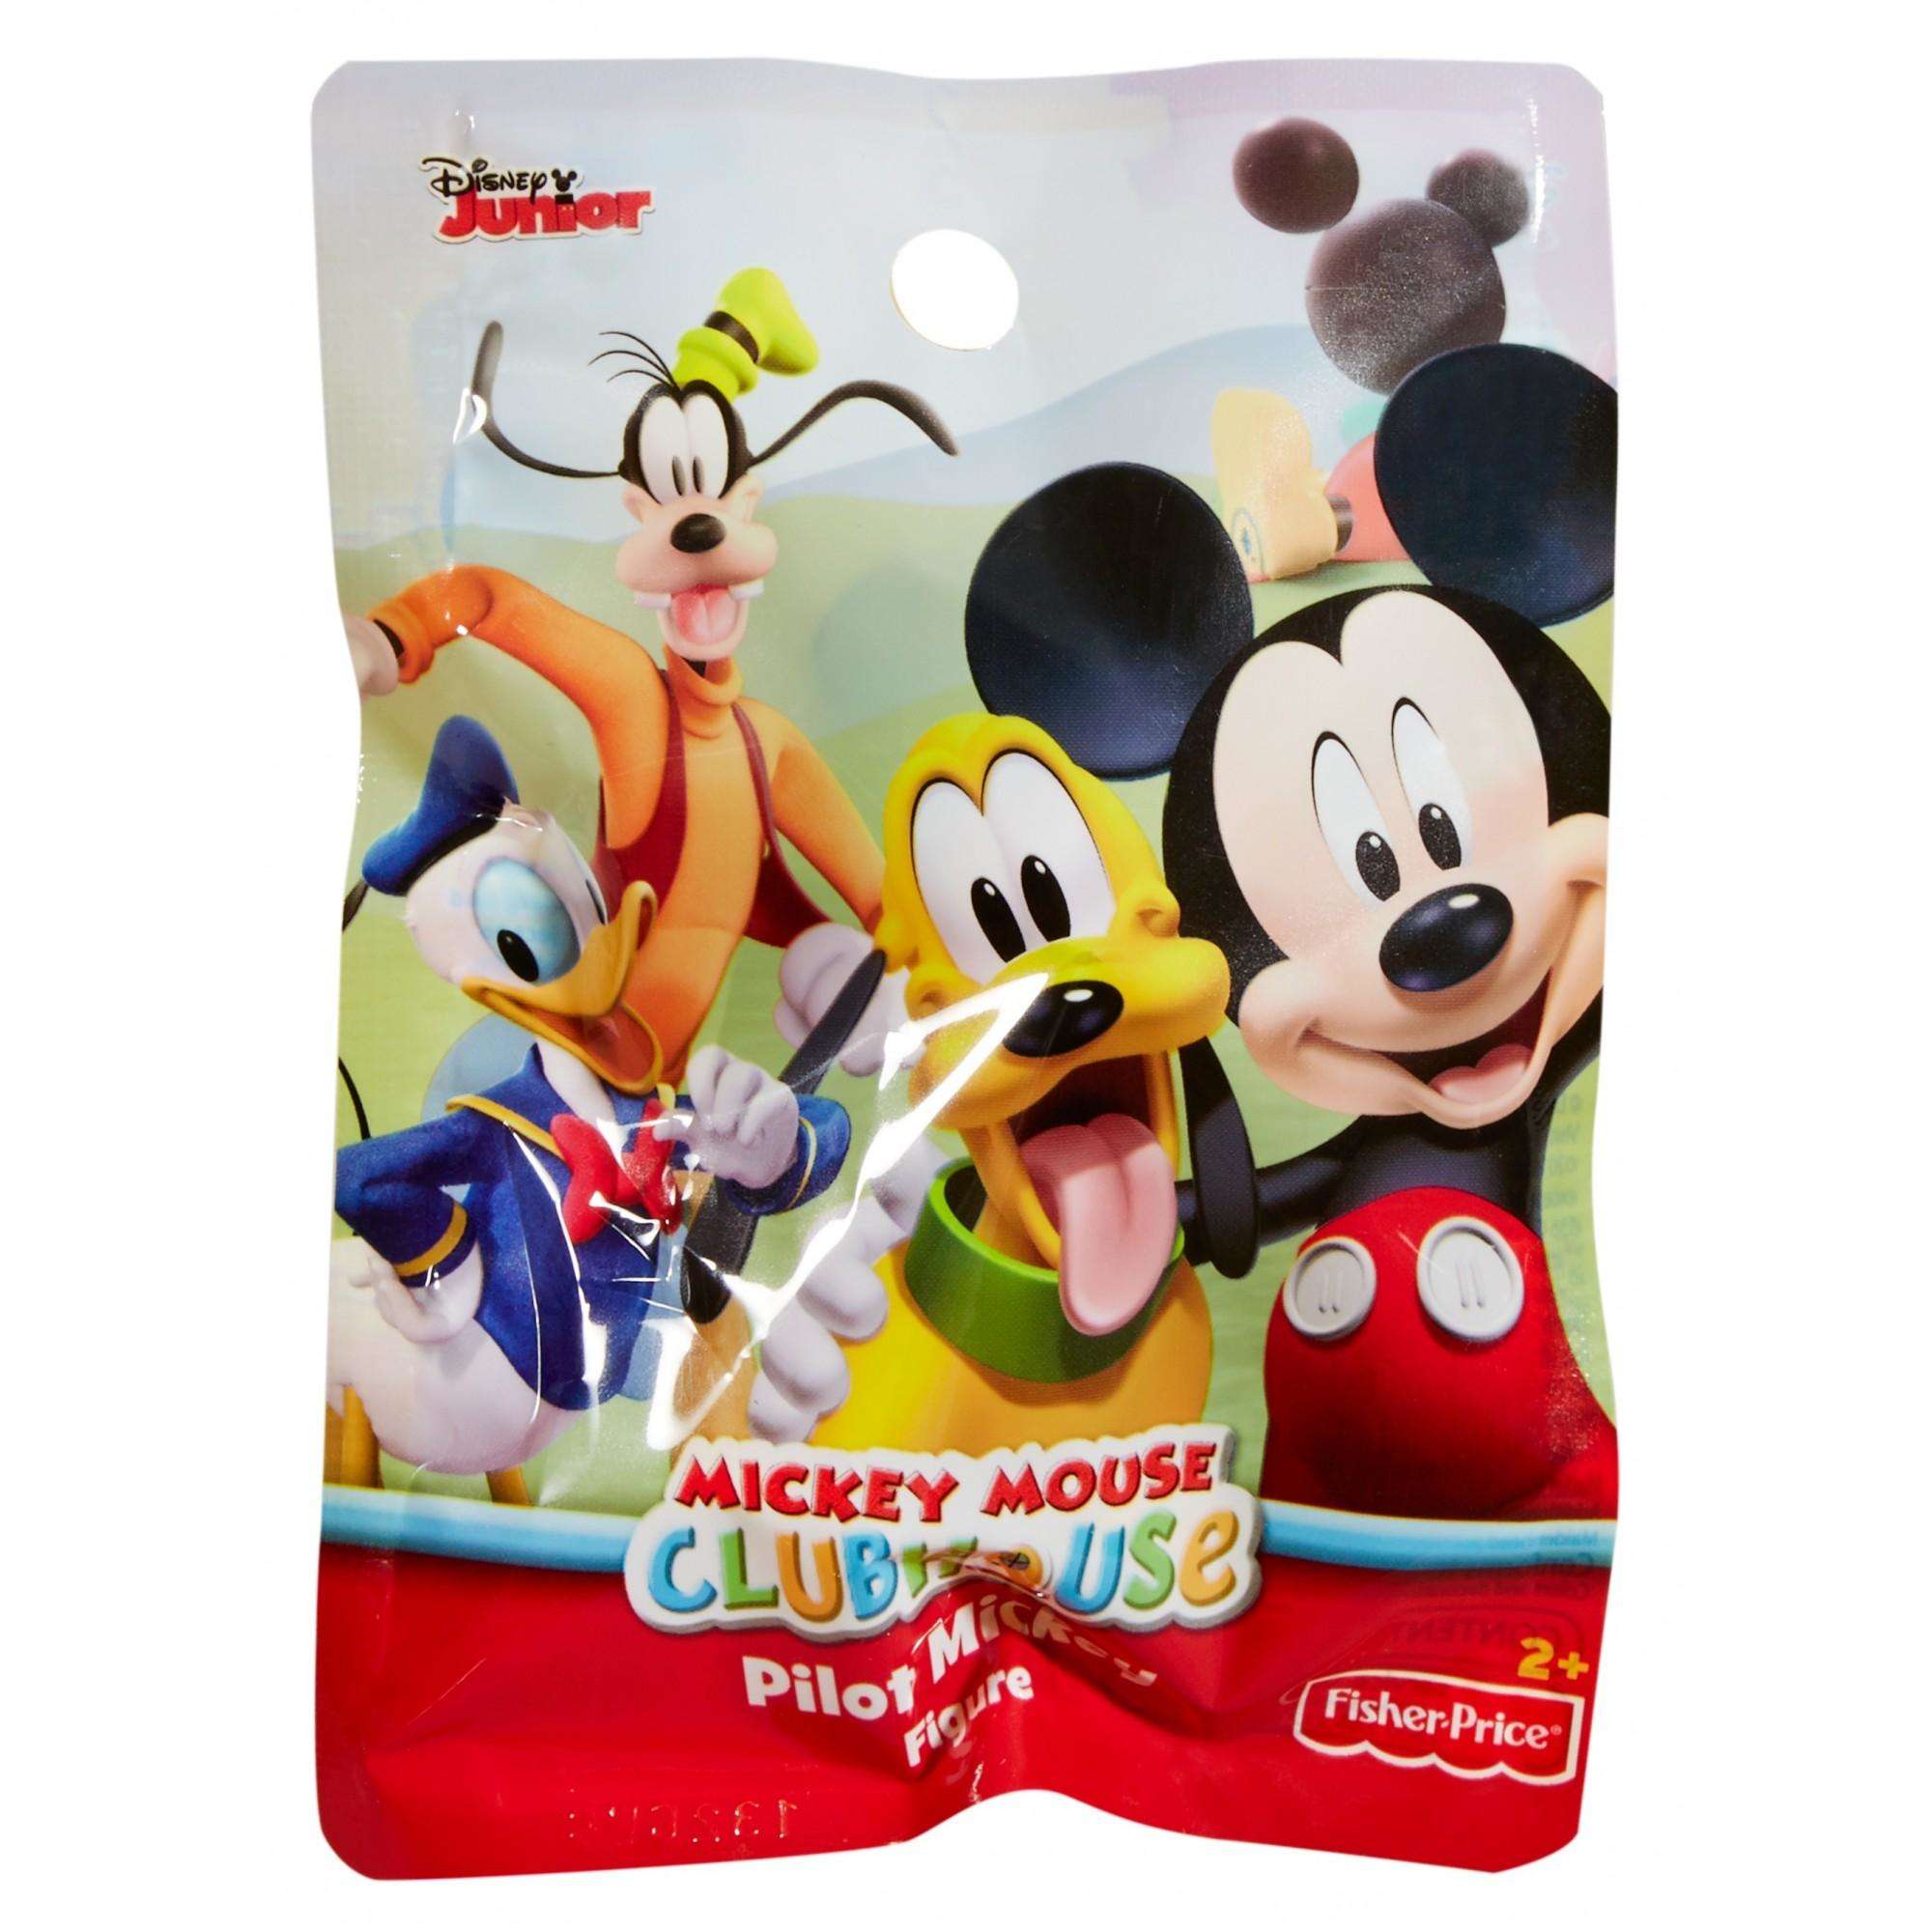 Disney Mickey Mouse Clubhouse - Pilot Mickey - image 4 of 5